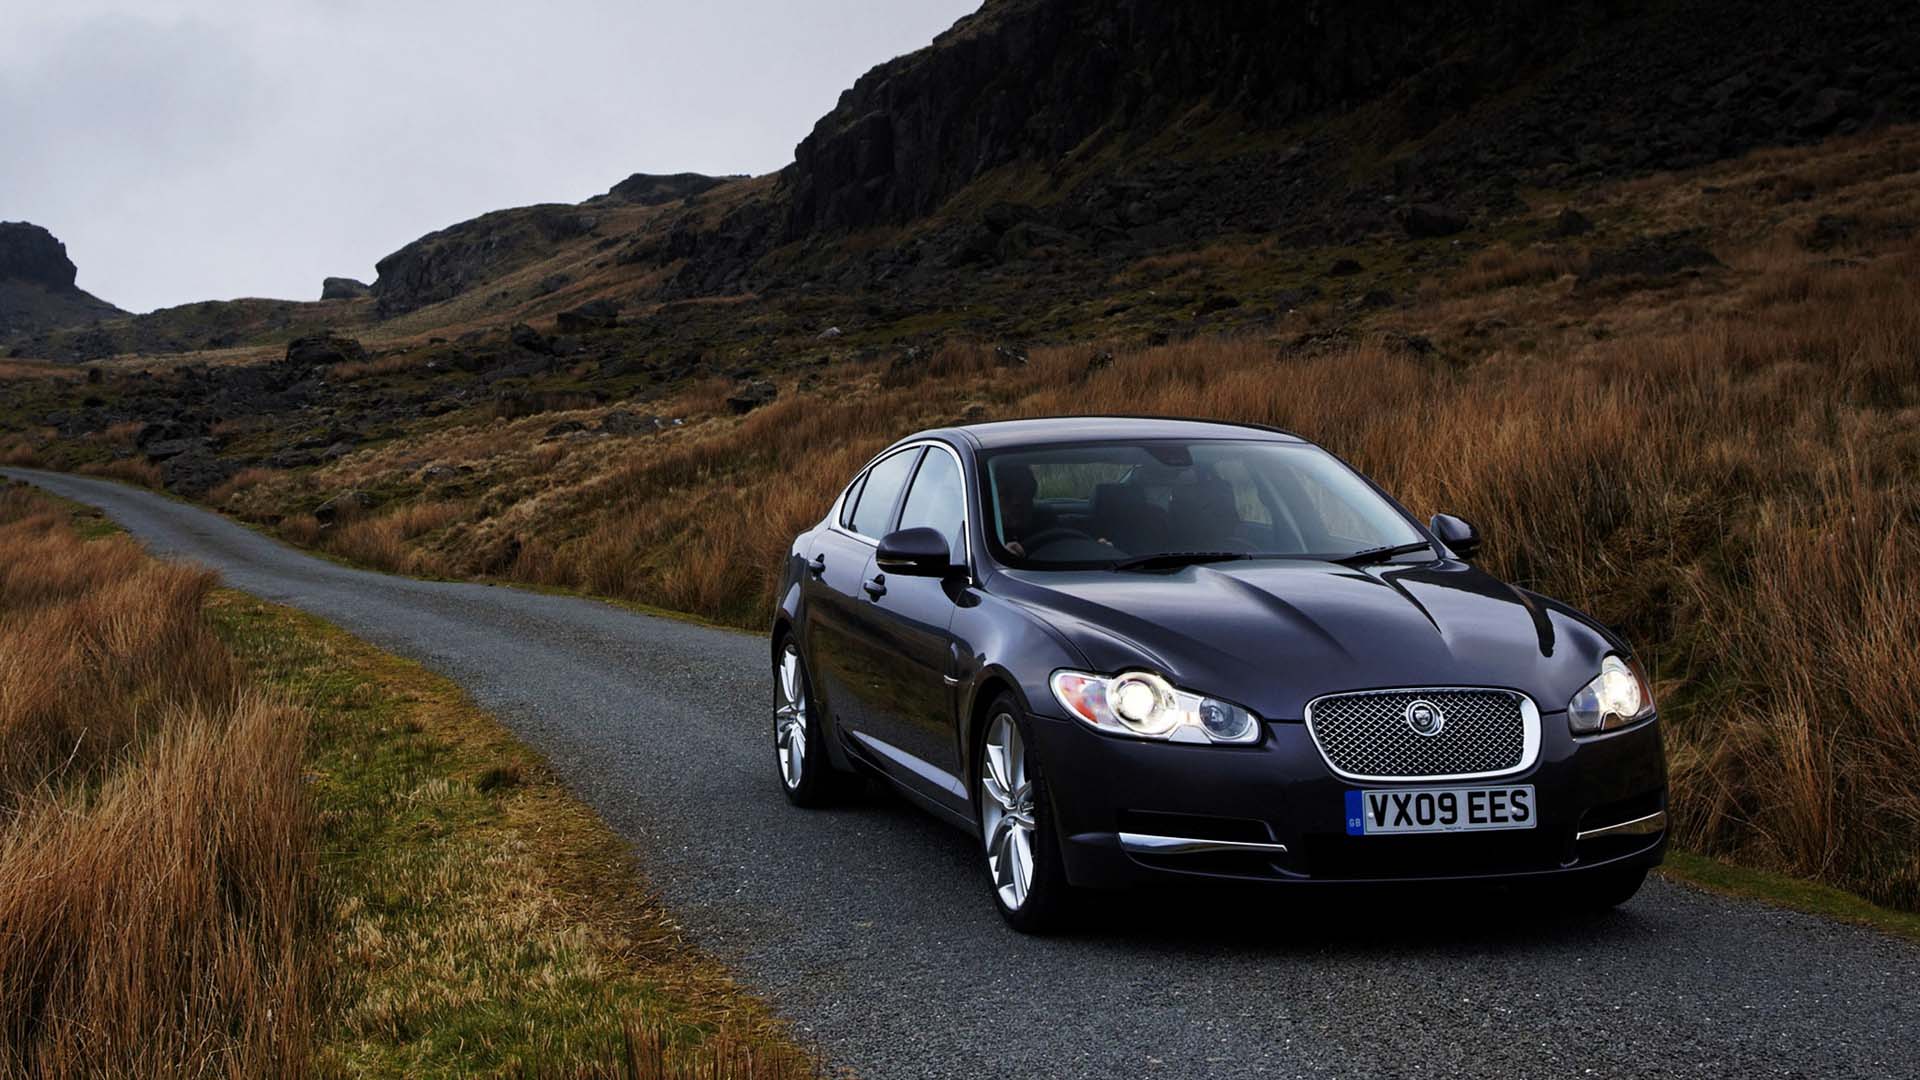 Wallpaper Jaguar Xf Photo Daily Background In HD With Imege